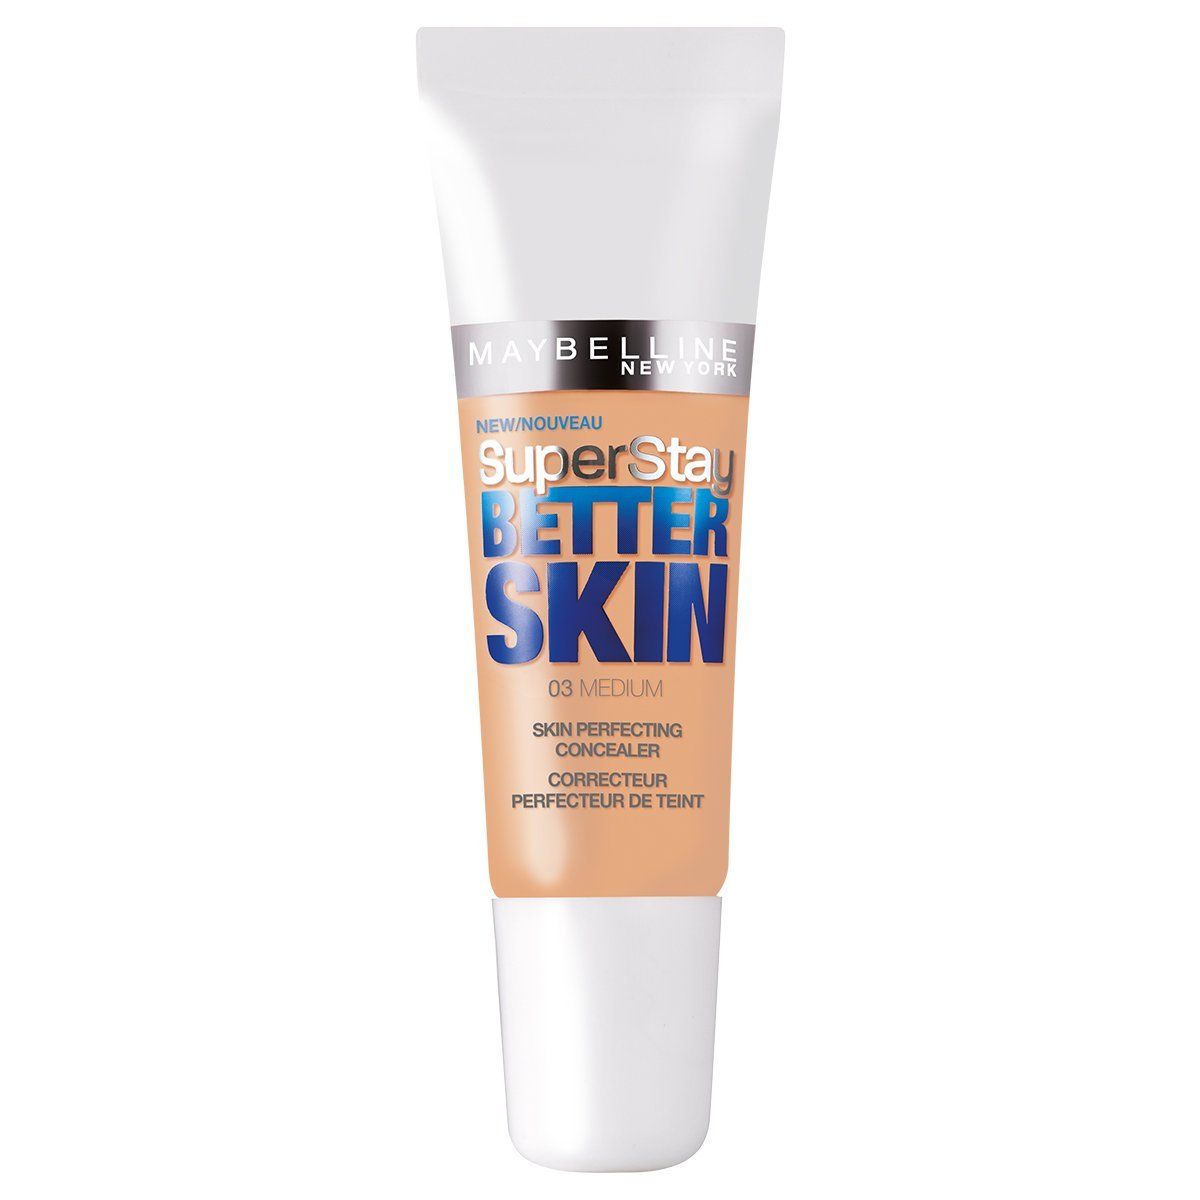 Skin perfecting concealer. Up to 24-hour wear. Transfer resistant. Tested under dermatological and ophthalmological control, fragrance-free. 11ml